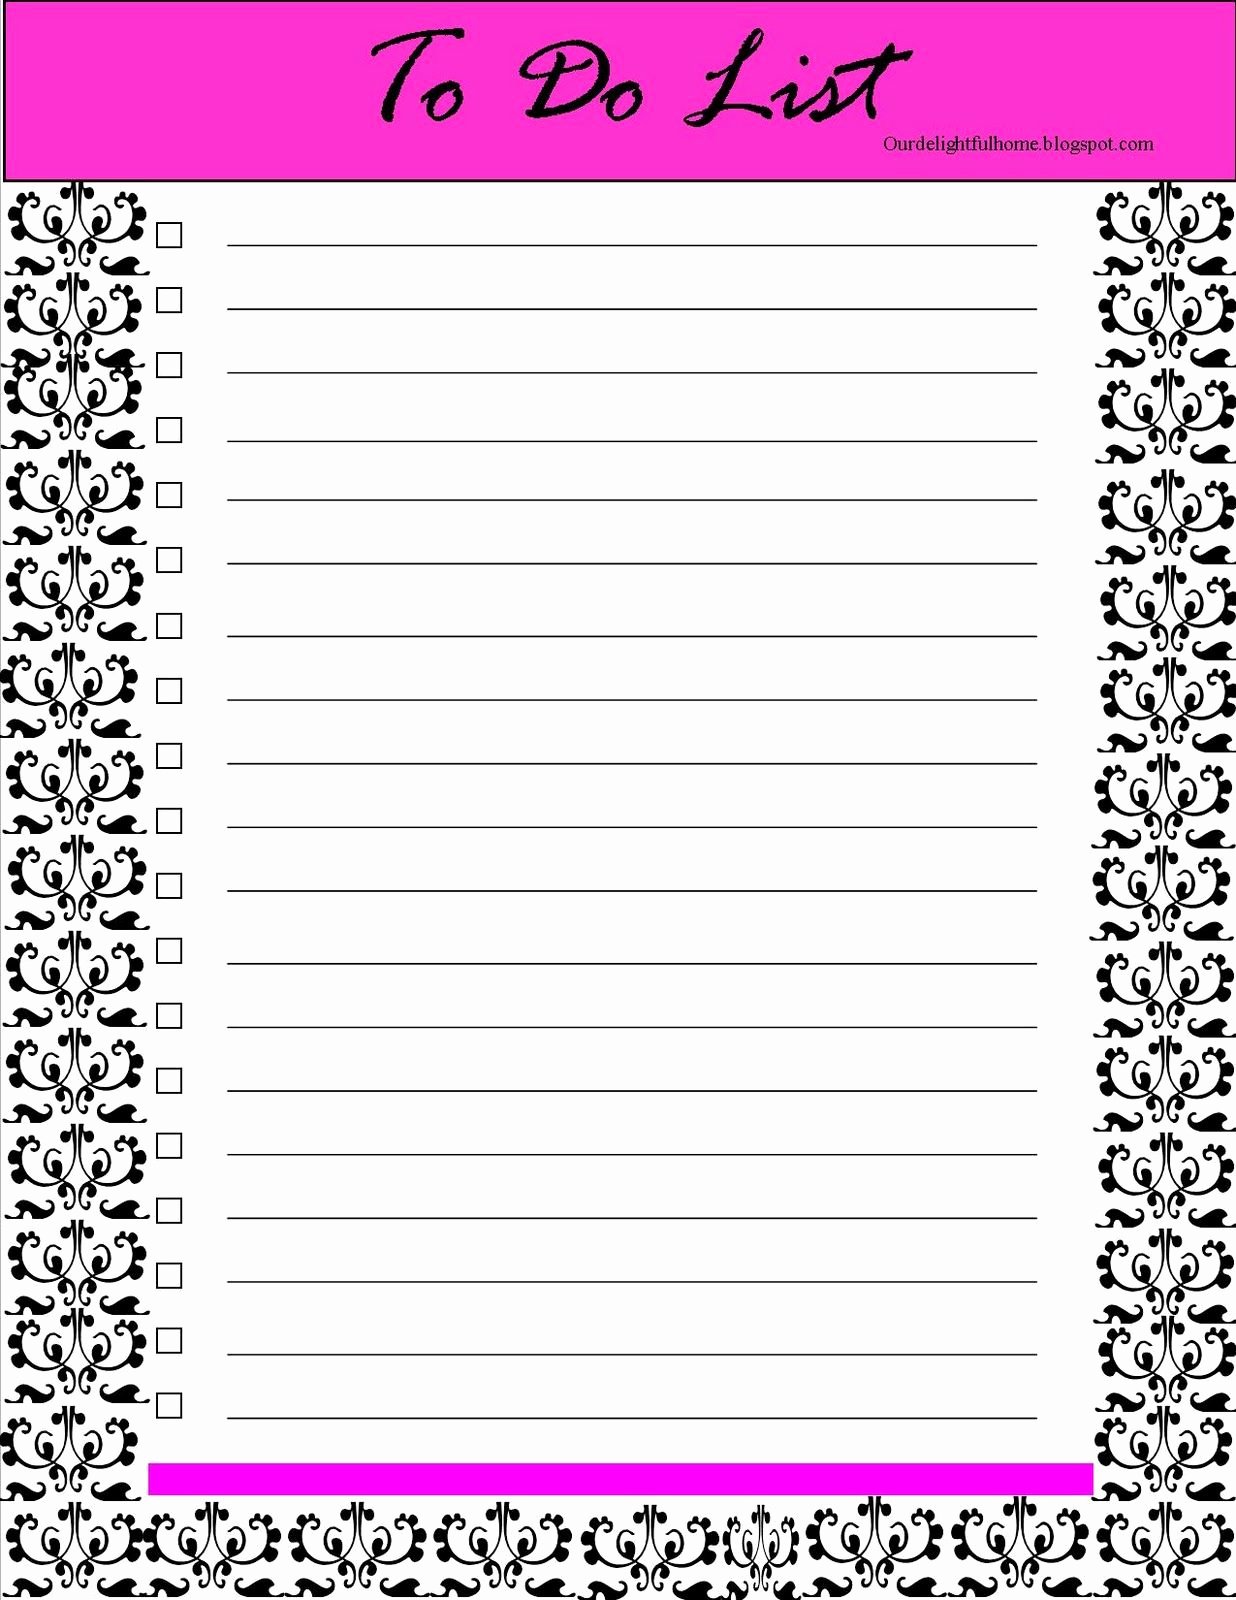 To Do List Template Free Best Of Cute Printable to Do List Template to Do List